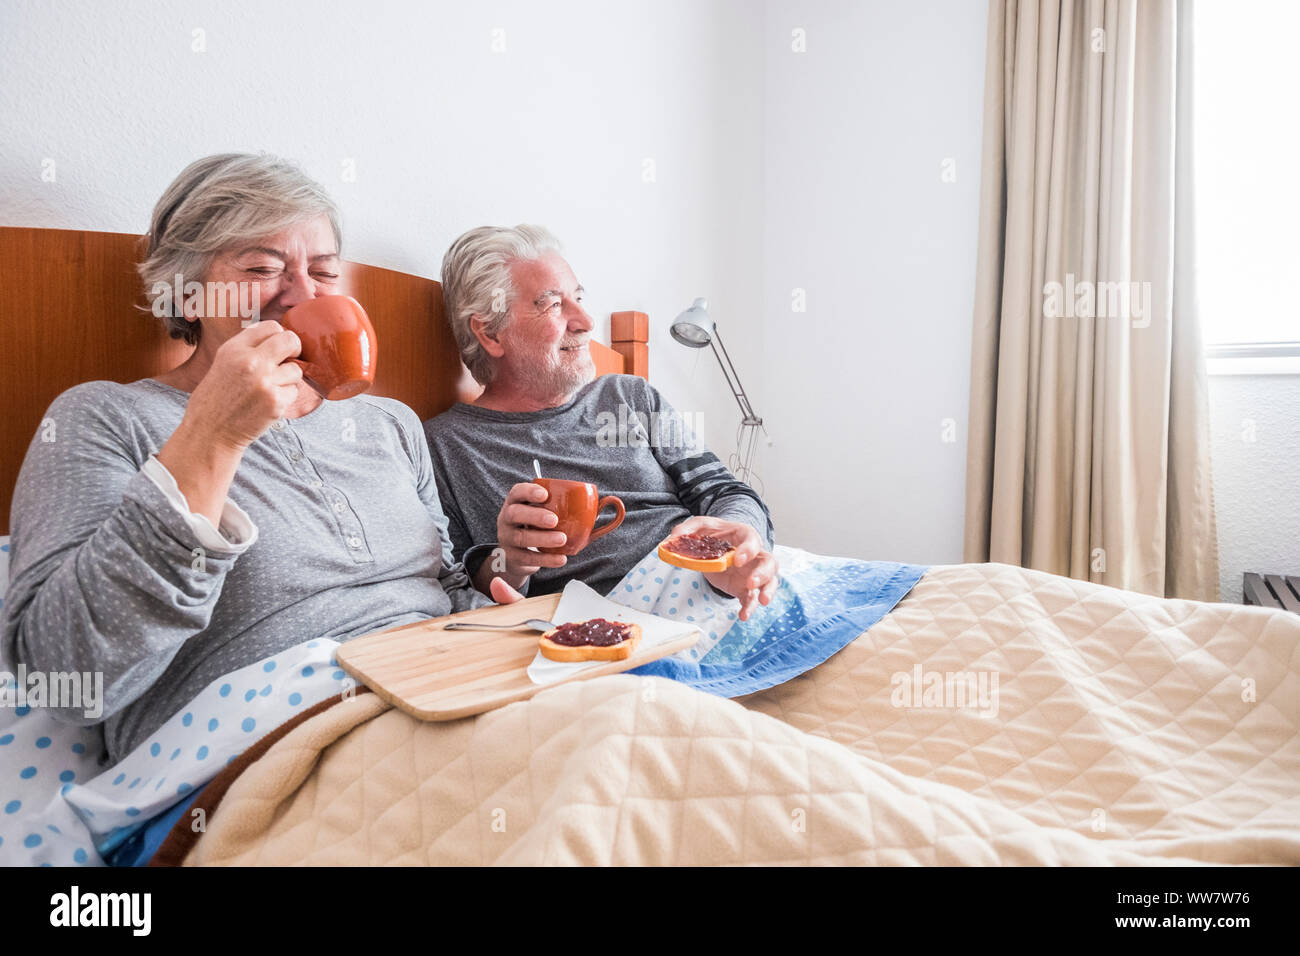 adult people aged couple having fun laughing and smiling on the bed at home. indoor bedroom scene family having brekfast lay down. window light and bright image Stock Photo